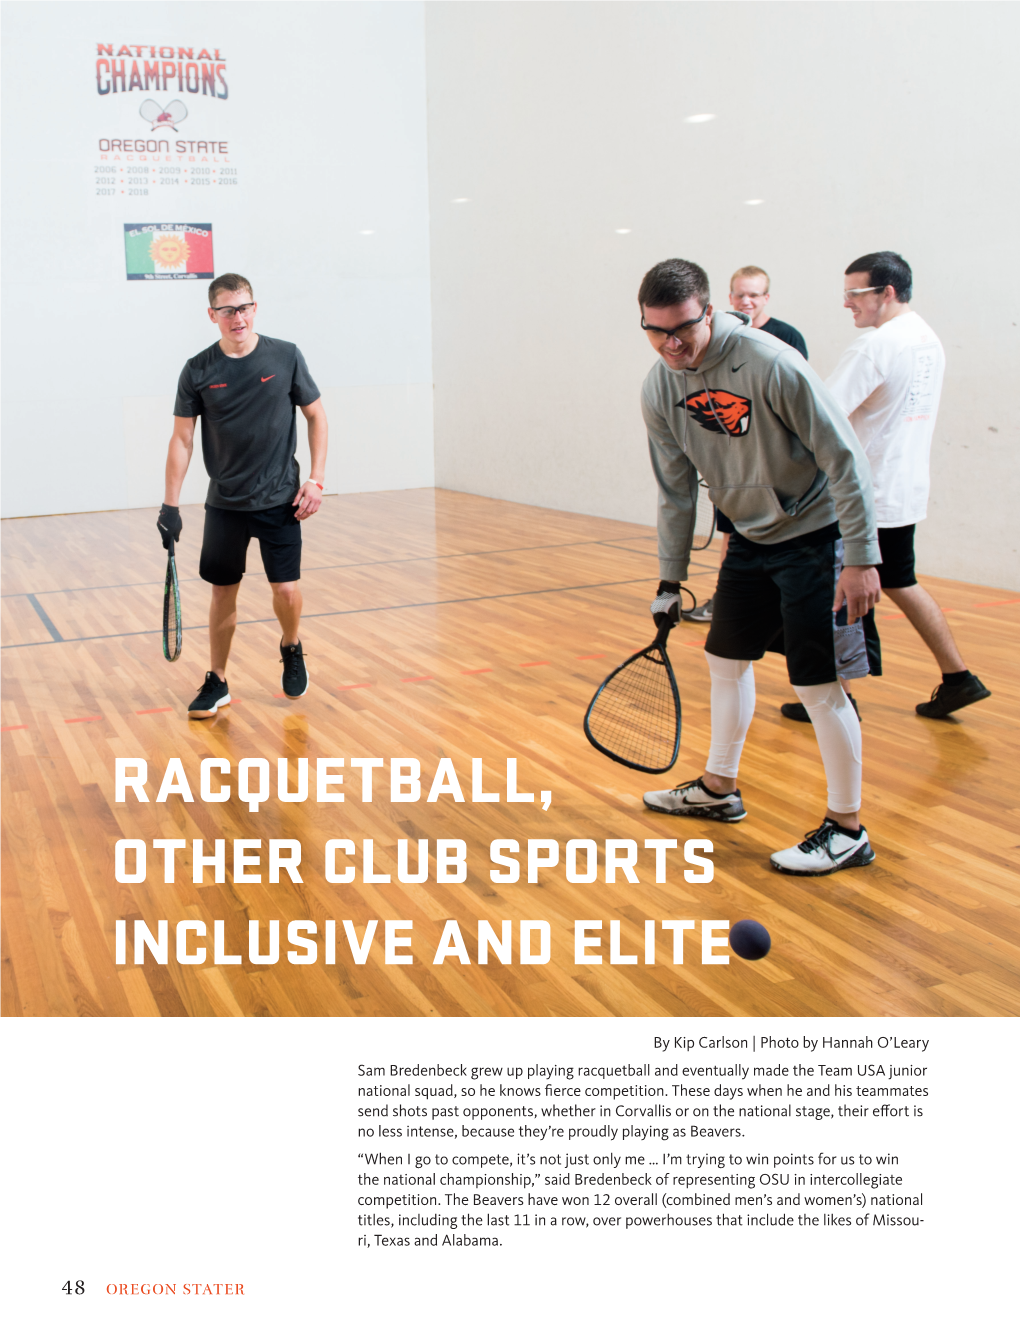 Racquetball, Other Club Sports Inclusive and Elite